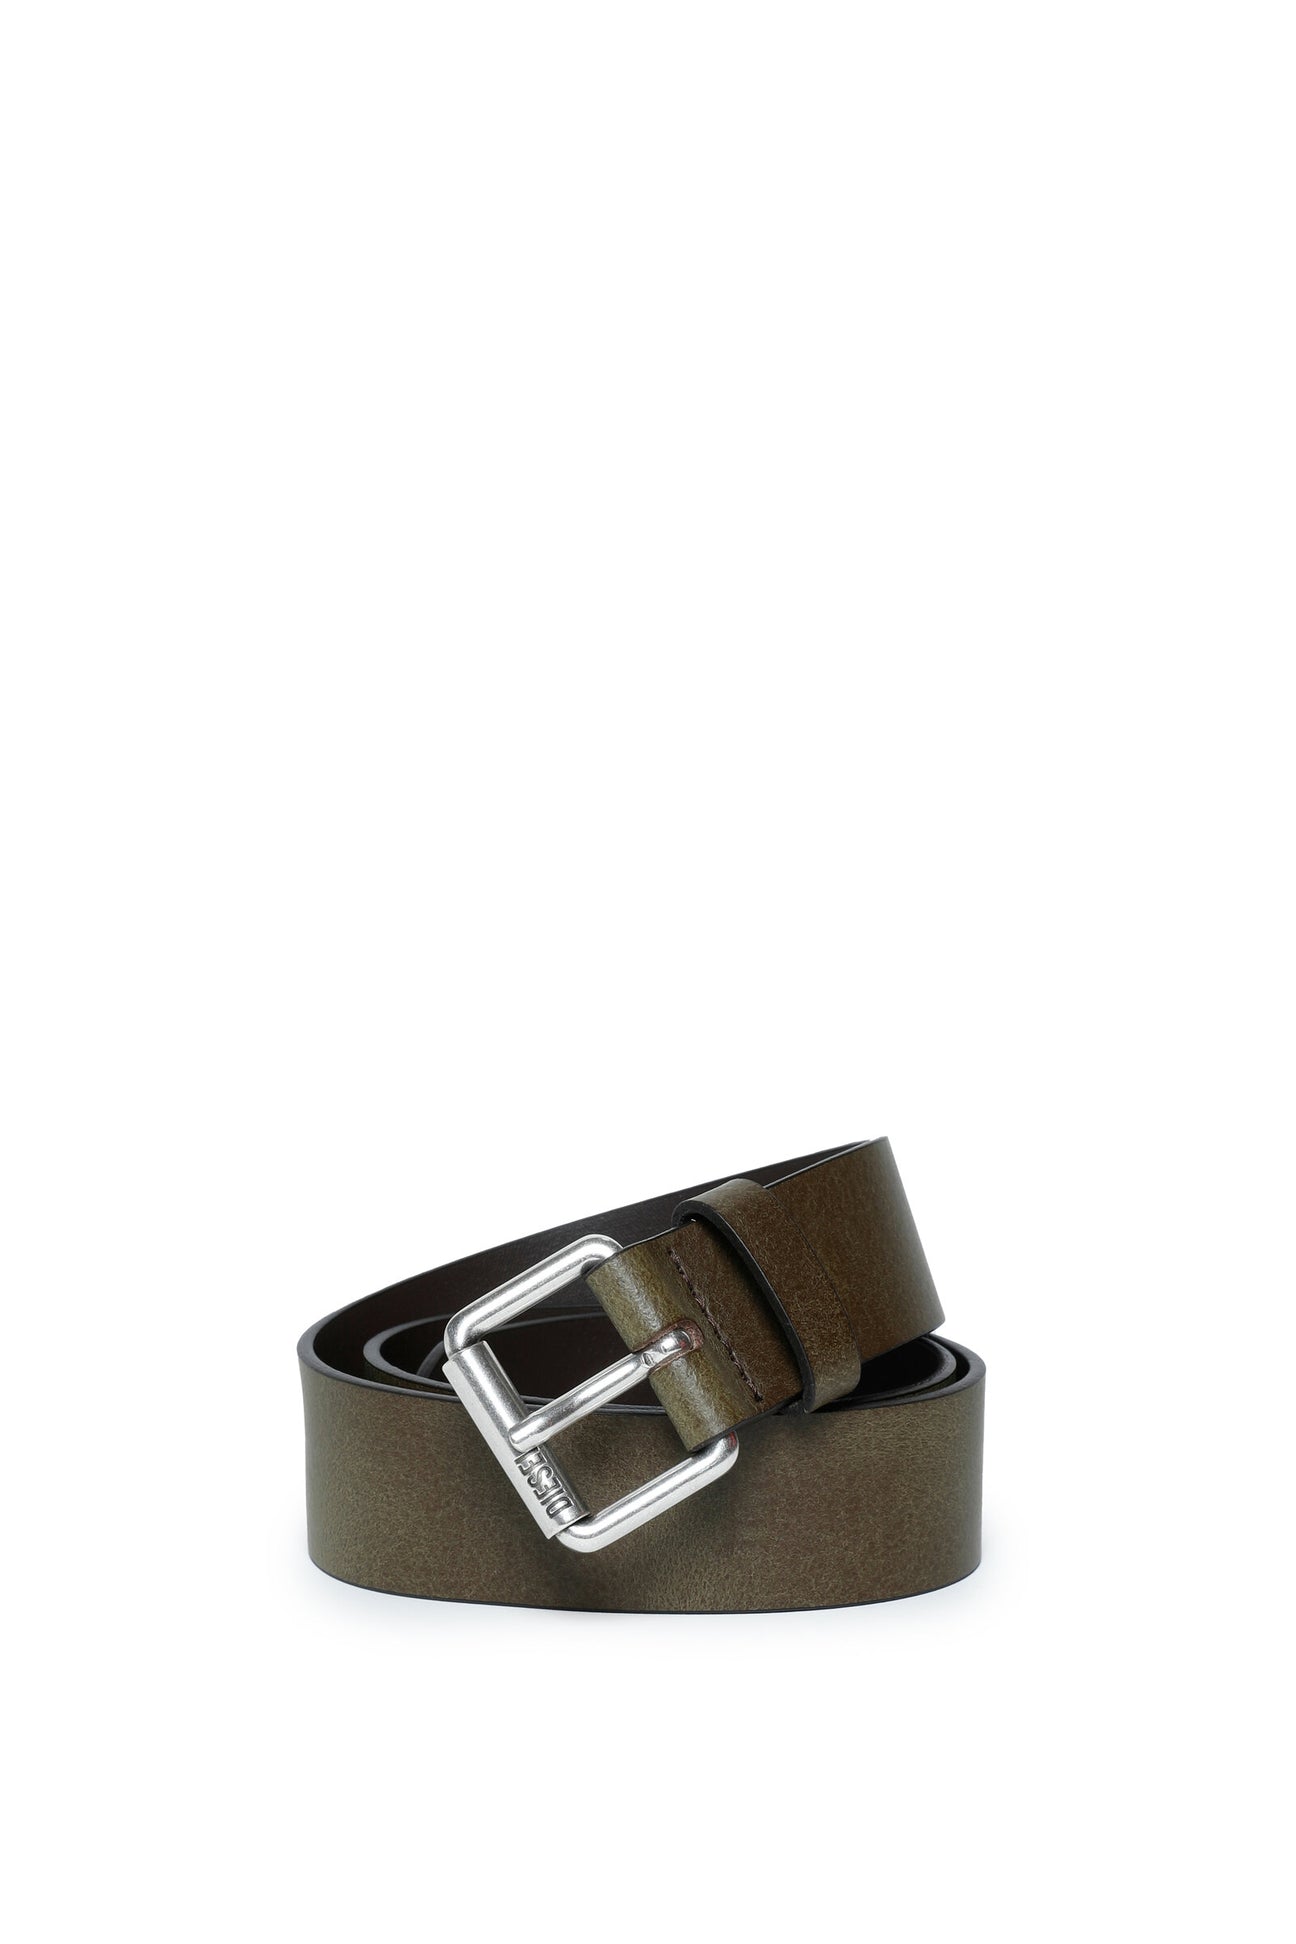 Brown leather belt with logo on buckle Brown leather belt with logo on buckle